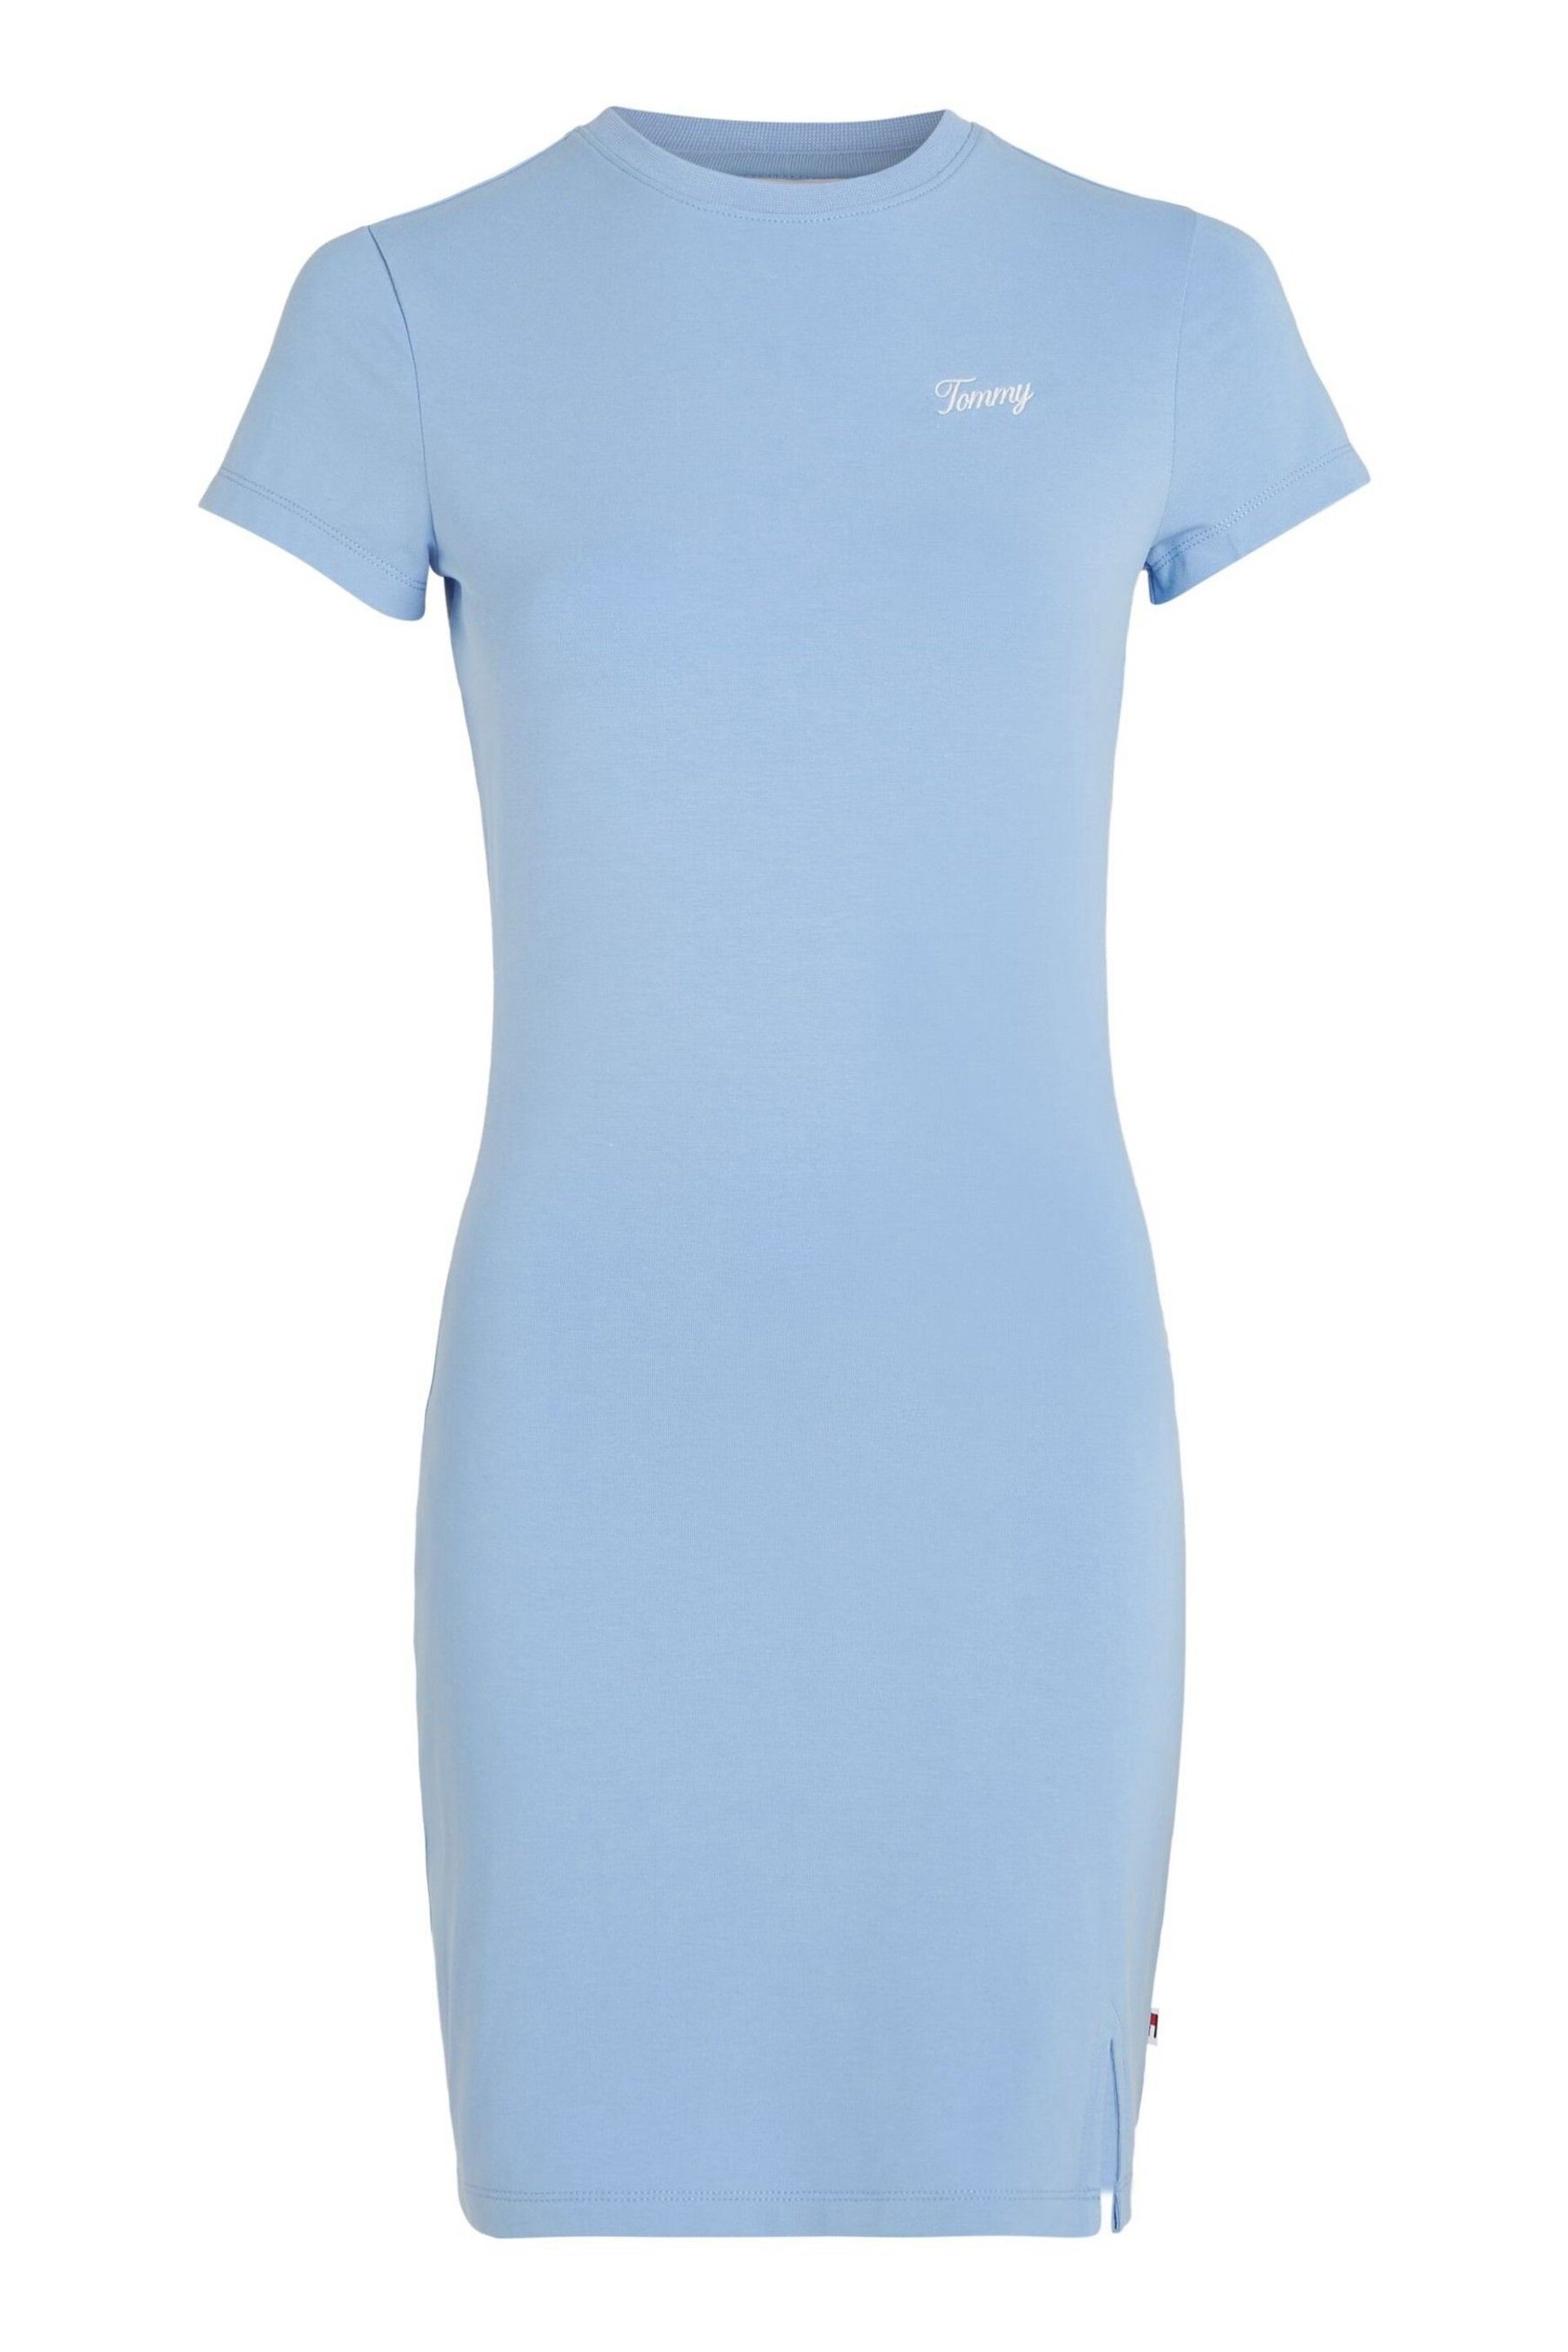 Tommy Jeans Blue Bodycon Dress - Image 4 of 6